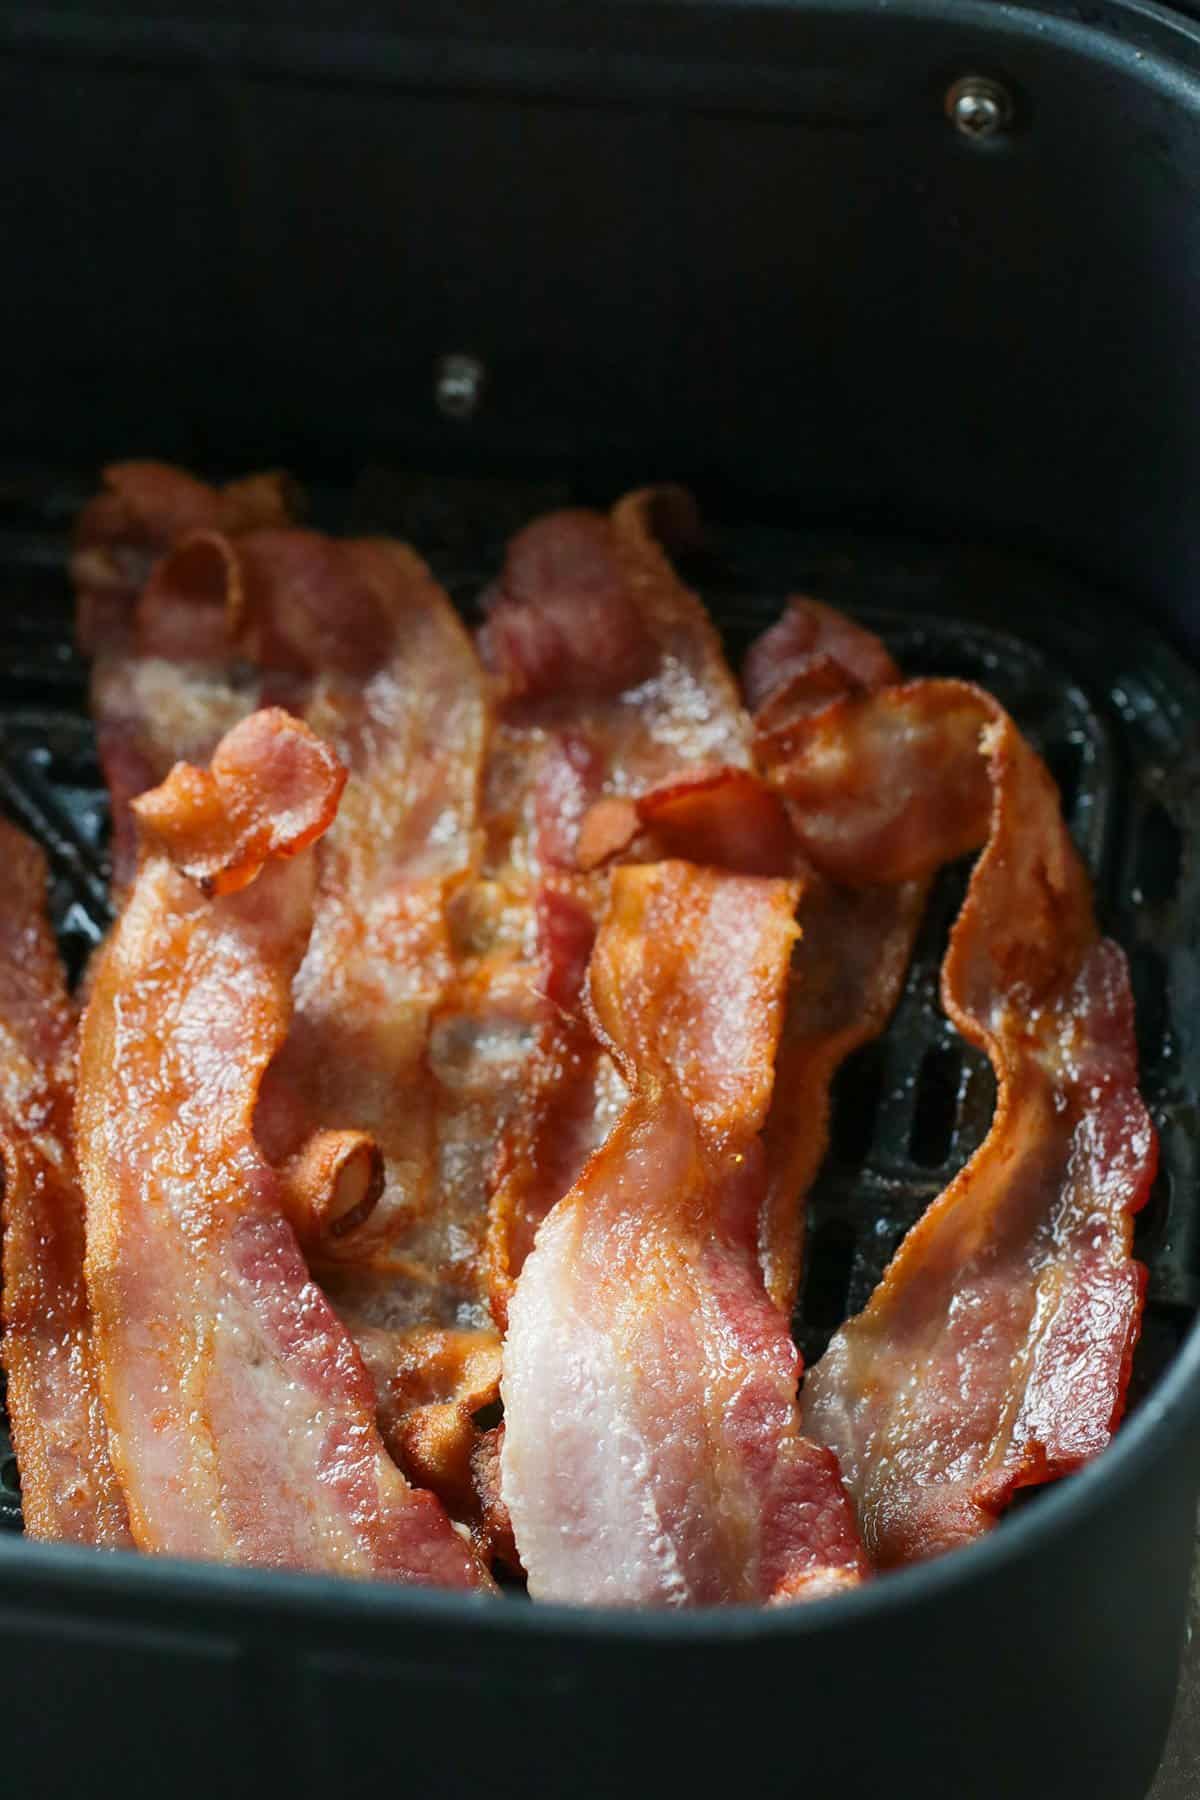 Cooked bacon in air fryer basket.